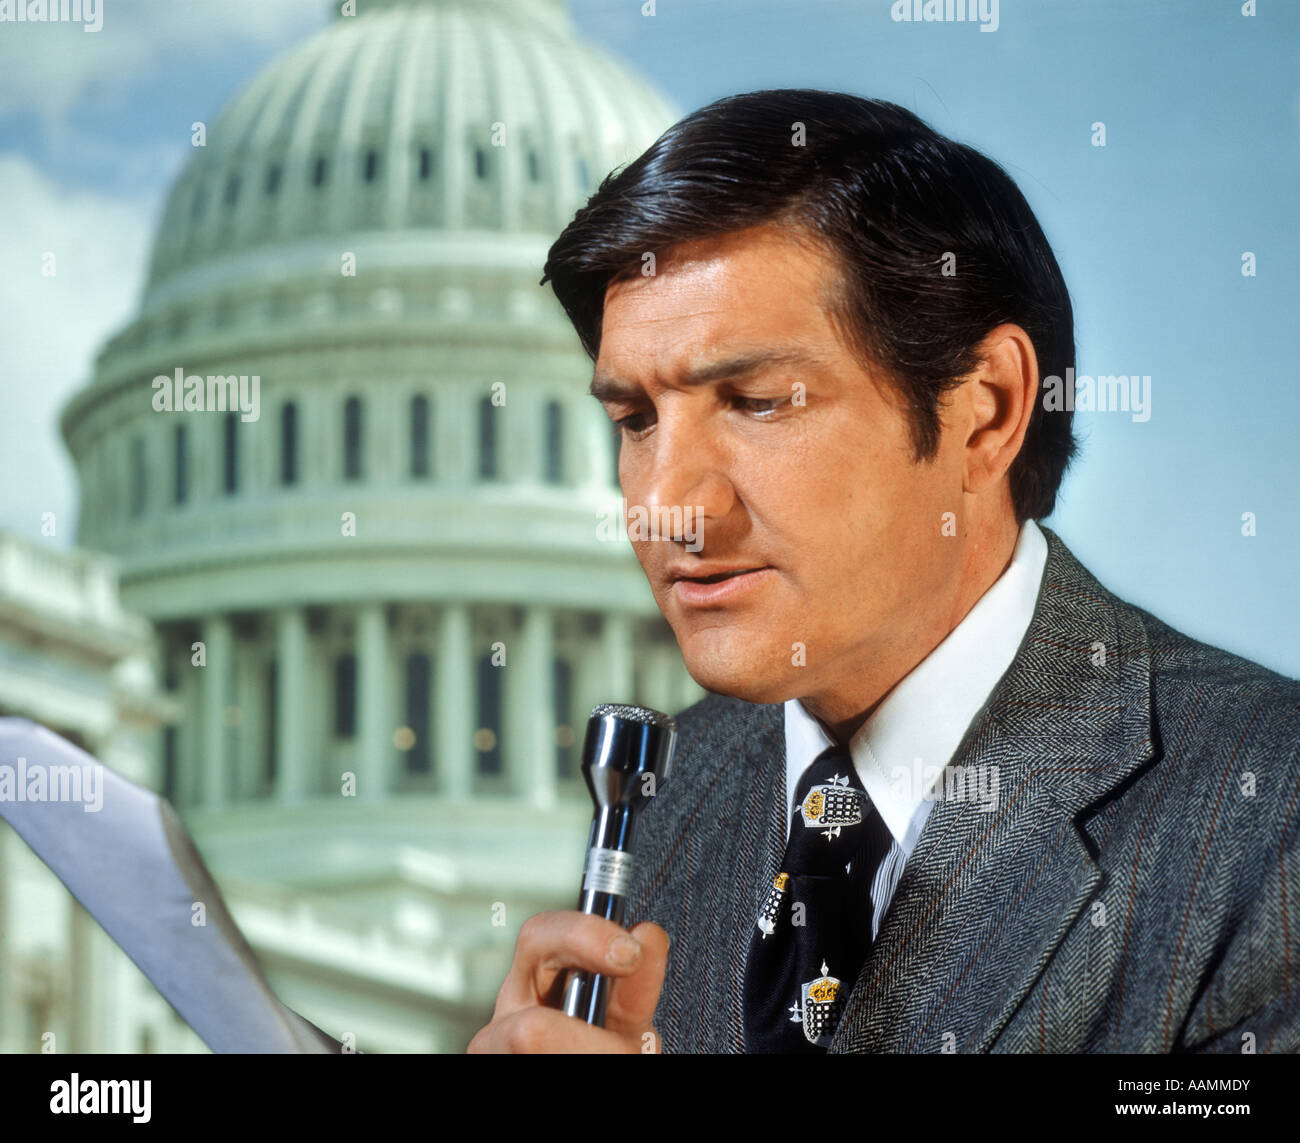 1970s NEWSMAN REPORTER READING SCRIPT INTO MICROPHONE IN FRONT OF WASHINGTON DC CAPITOL DOME Stock Photo